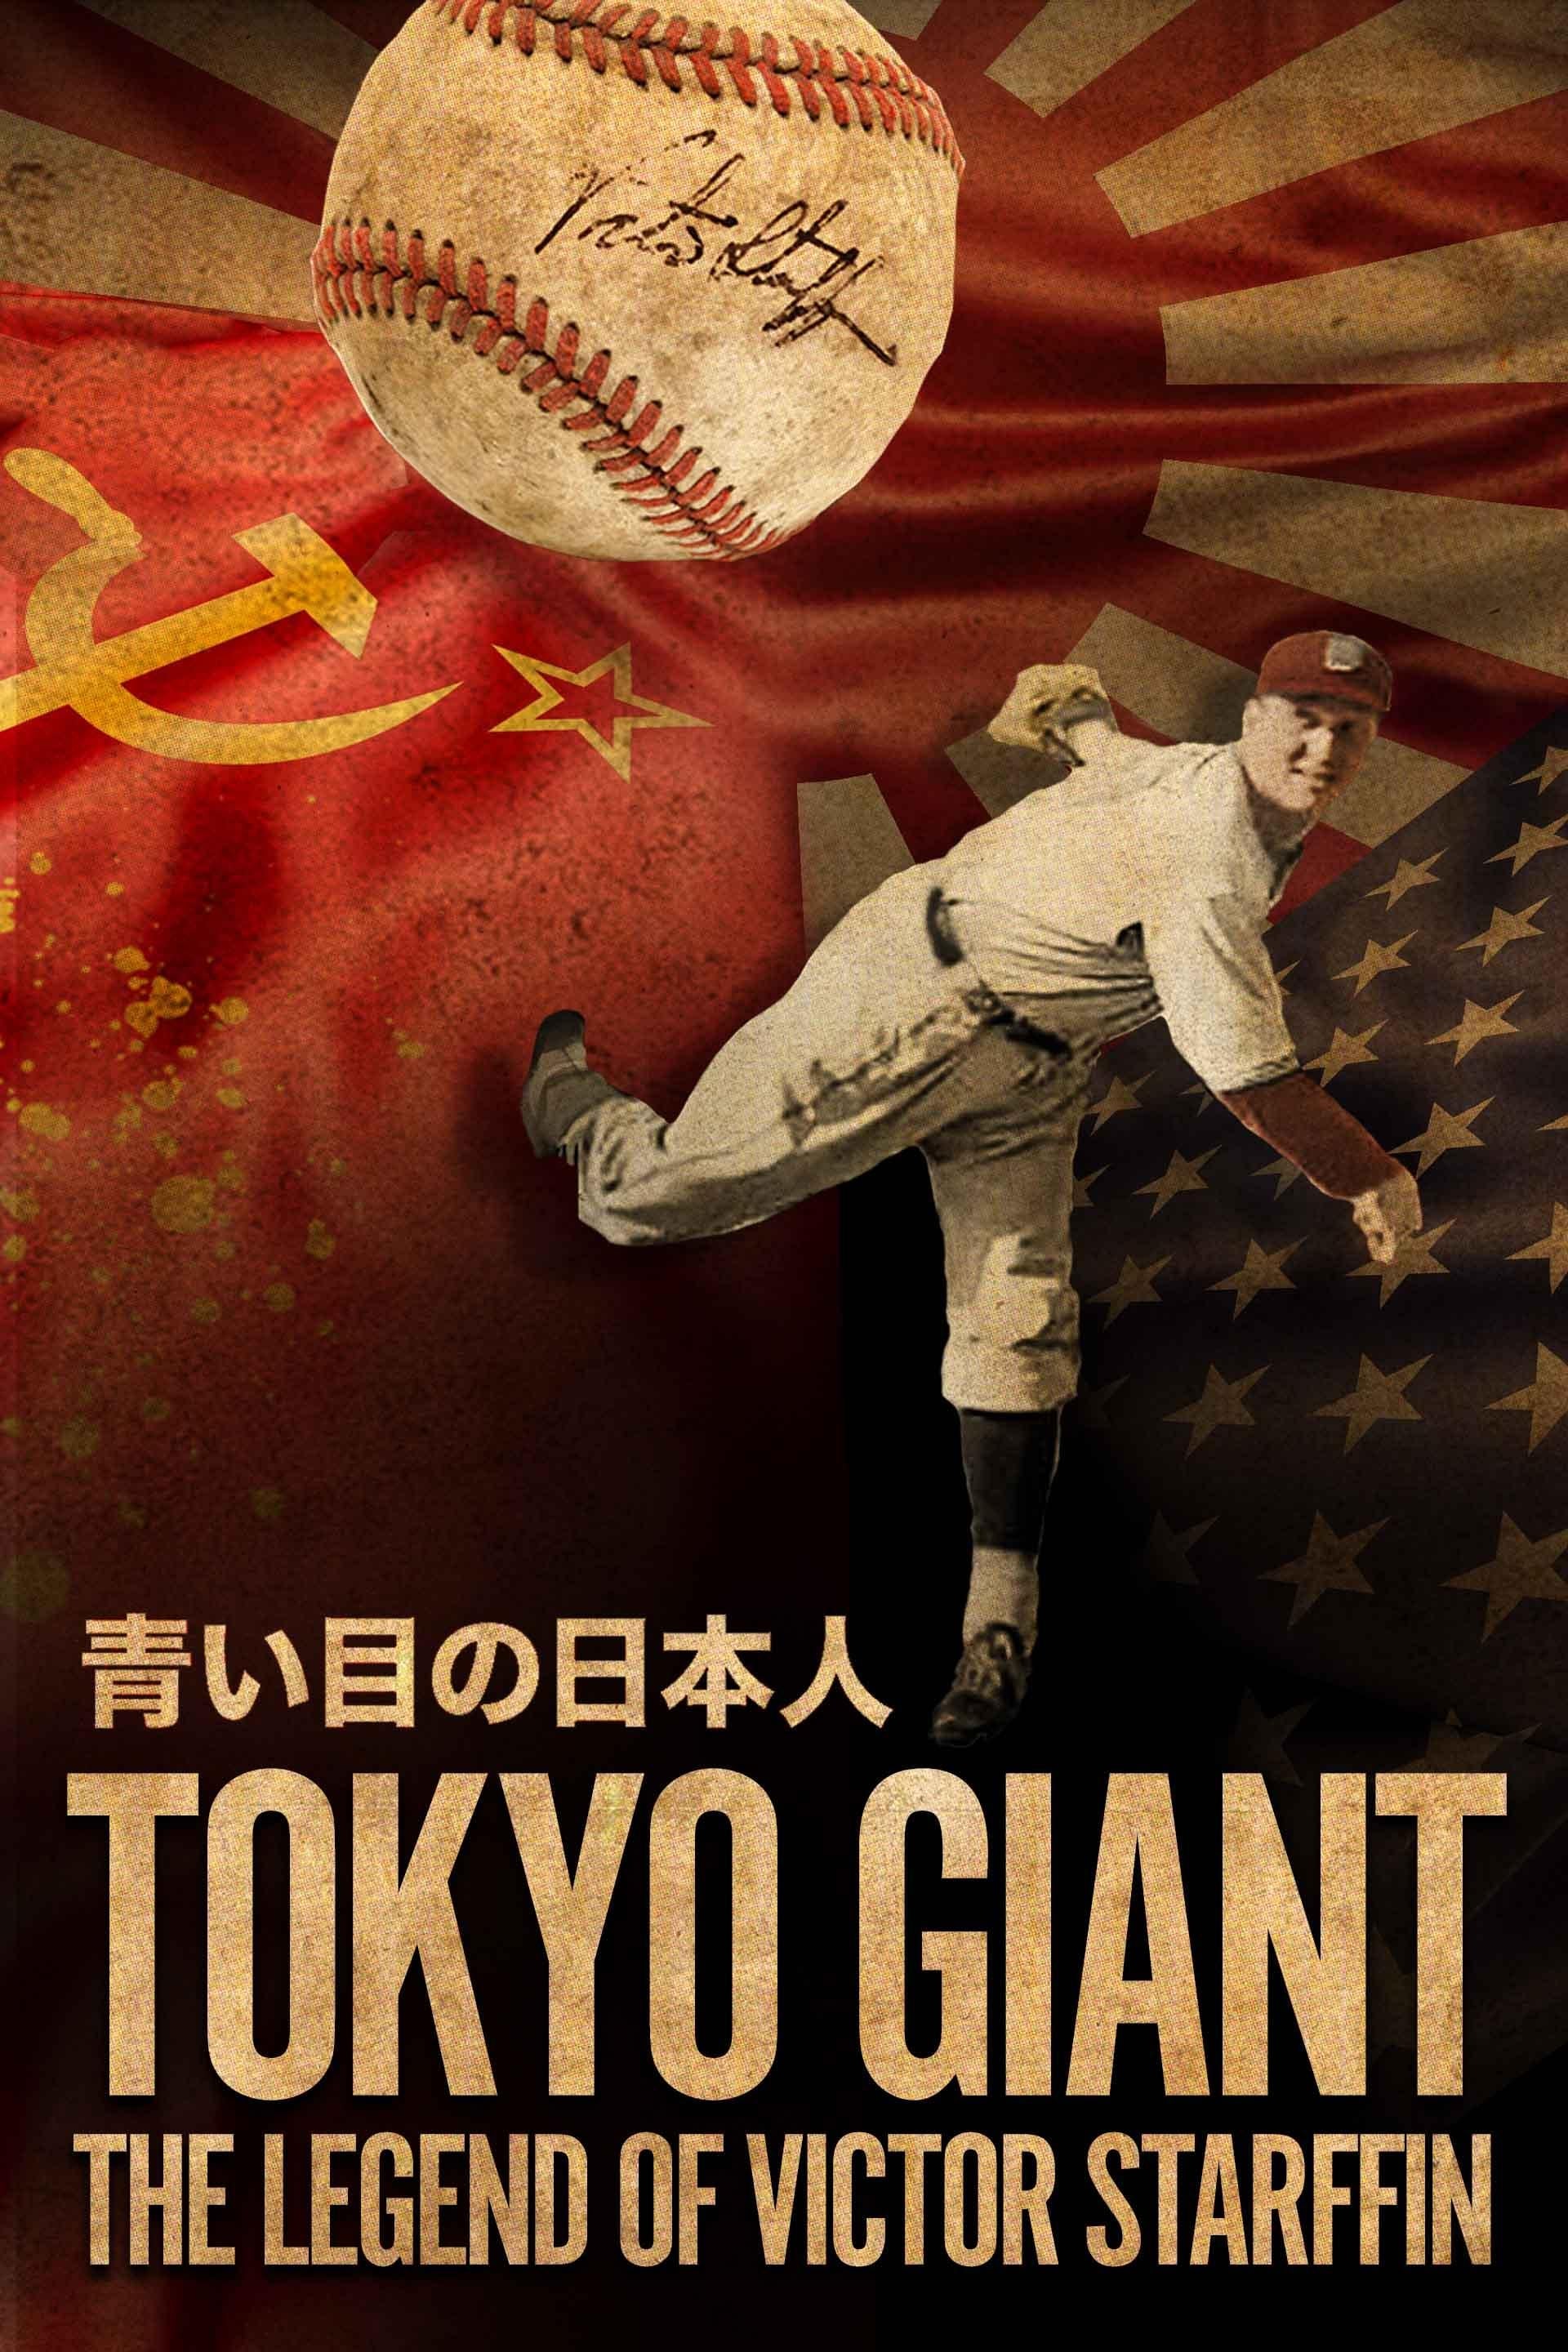 Tokyo Giant: The Legend of Victor Starffin